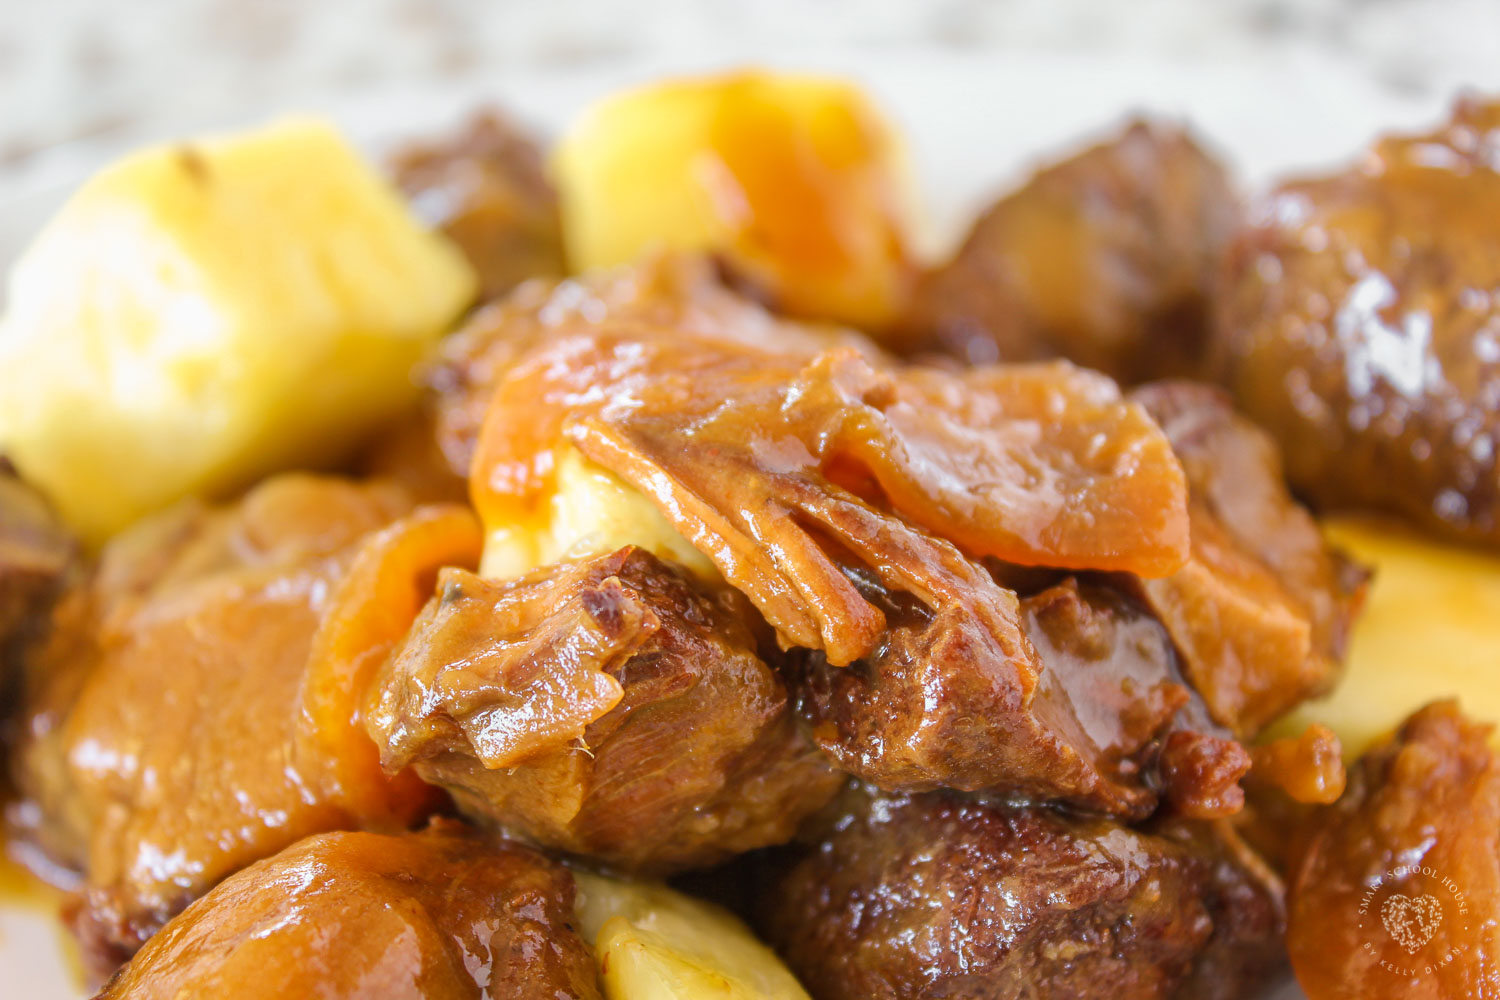 Sweet Hawaiian Crock Pot Chicken Recipe. Tender chicken smothered in a tropical glaze for a burst of pineapple flavor in every bite! Cook on low in Crock Pot 6-8 hours, that’s it! Done! 